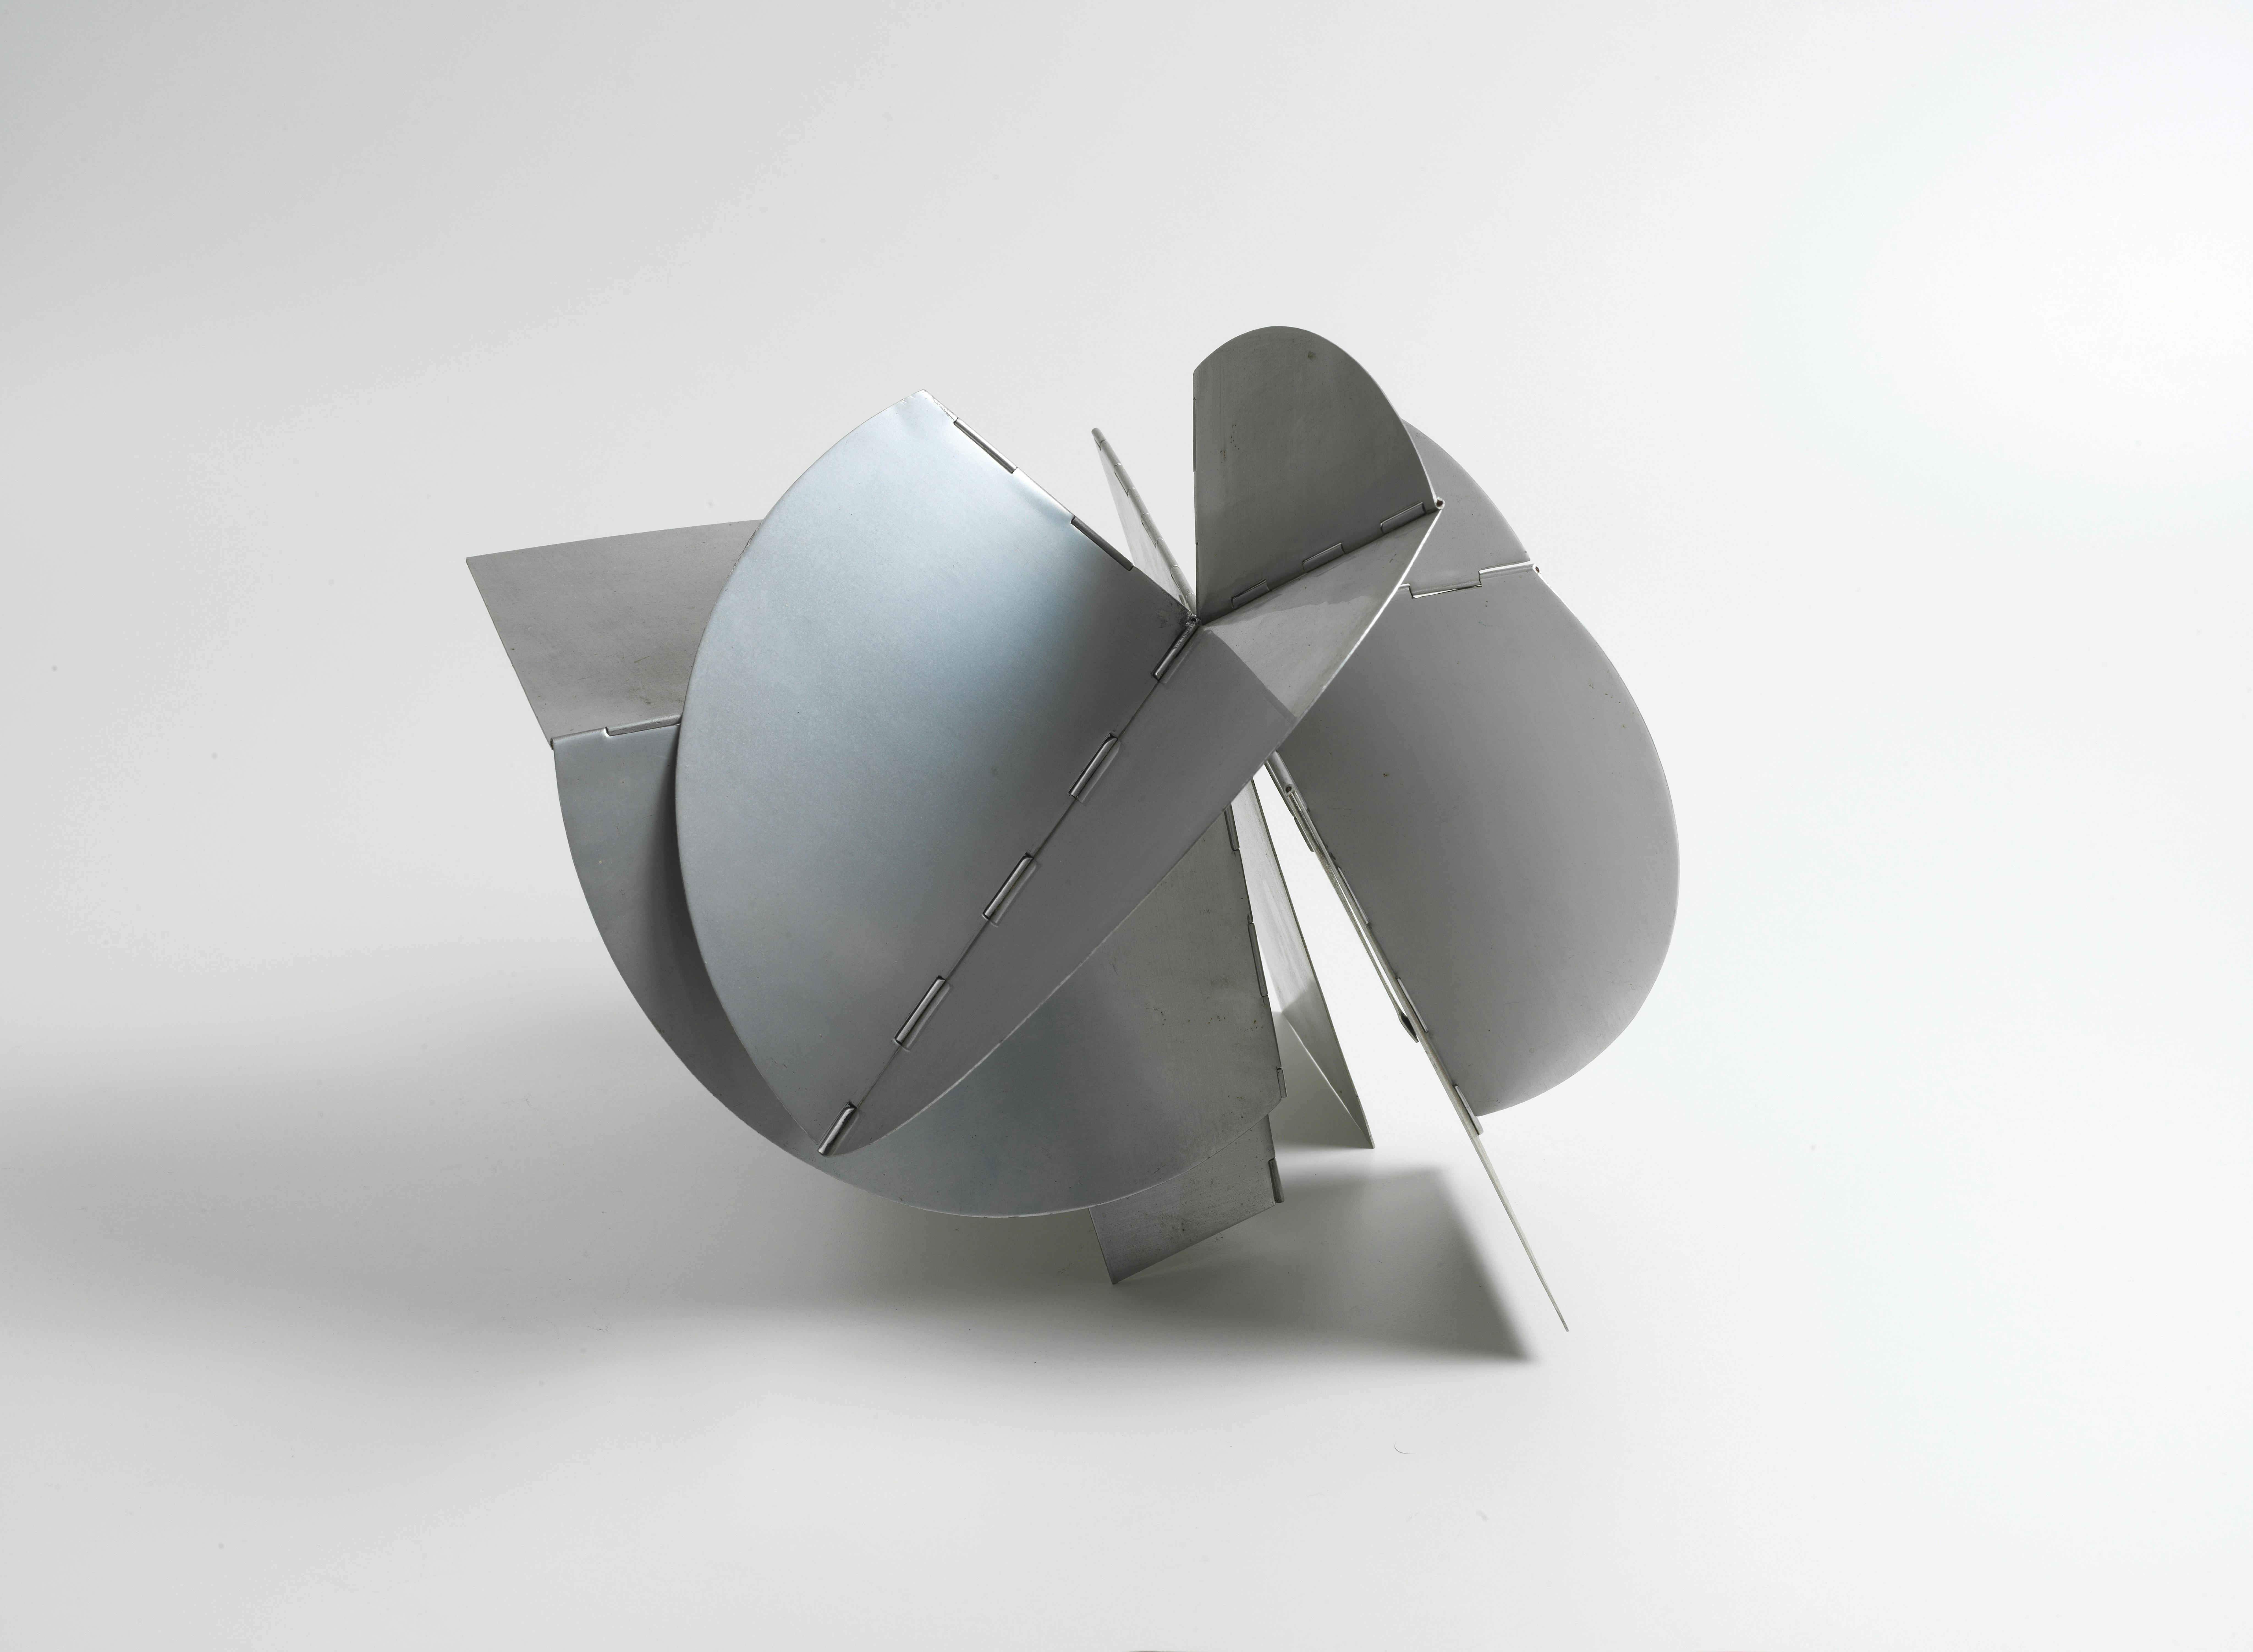 A small sculpture made with thin pieces of silver sheet metal is arrayed at various angles. The various planes of the work range in shape from rectangles to semicircles and are fitted together at acute angles. Several of the vertices between them are hinged, so that the various places of the work can be adjusted by hand.